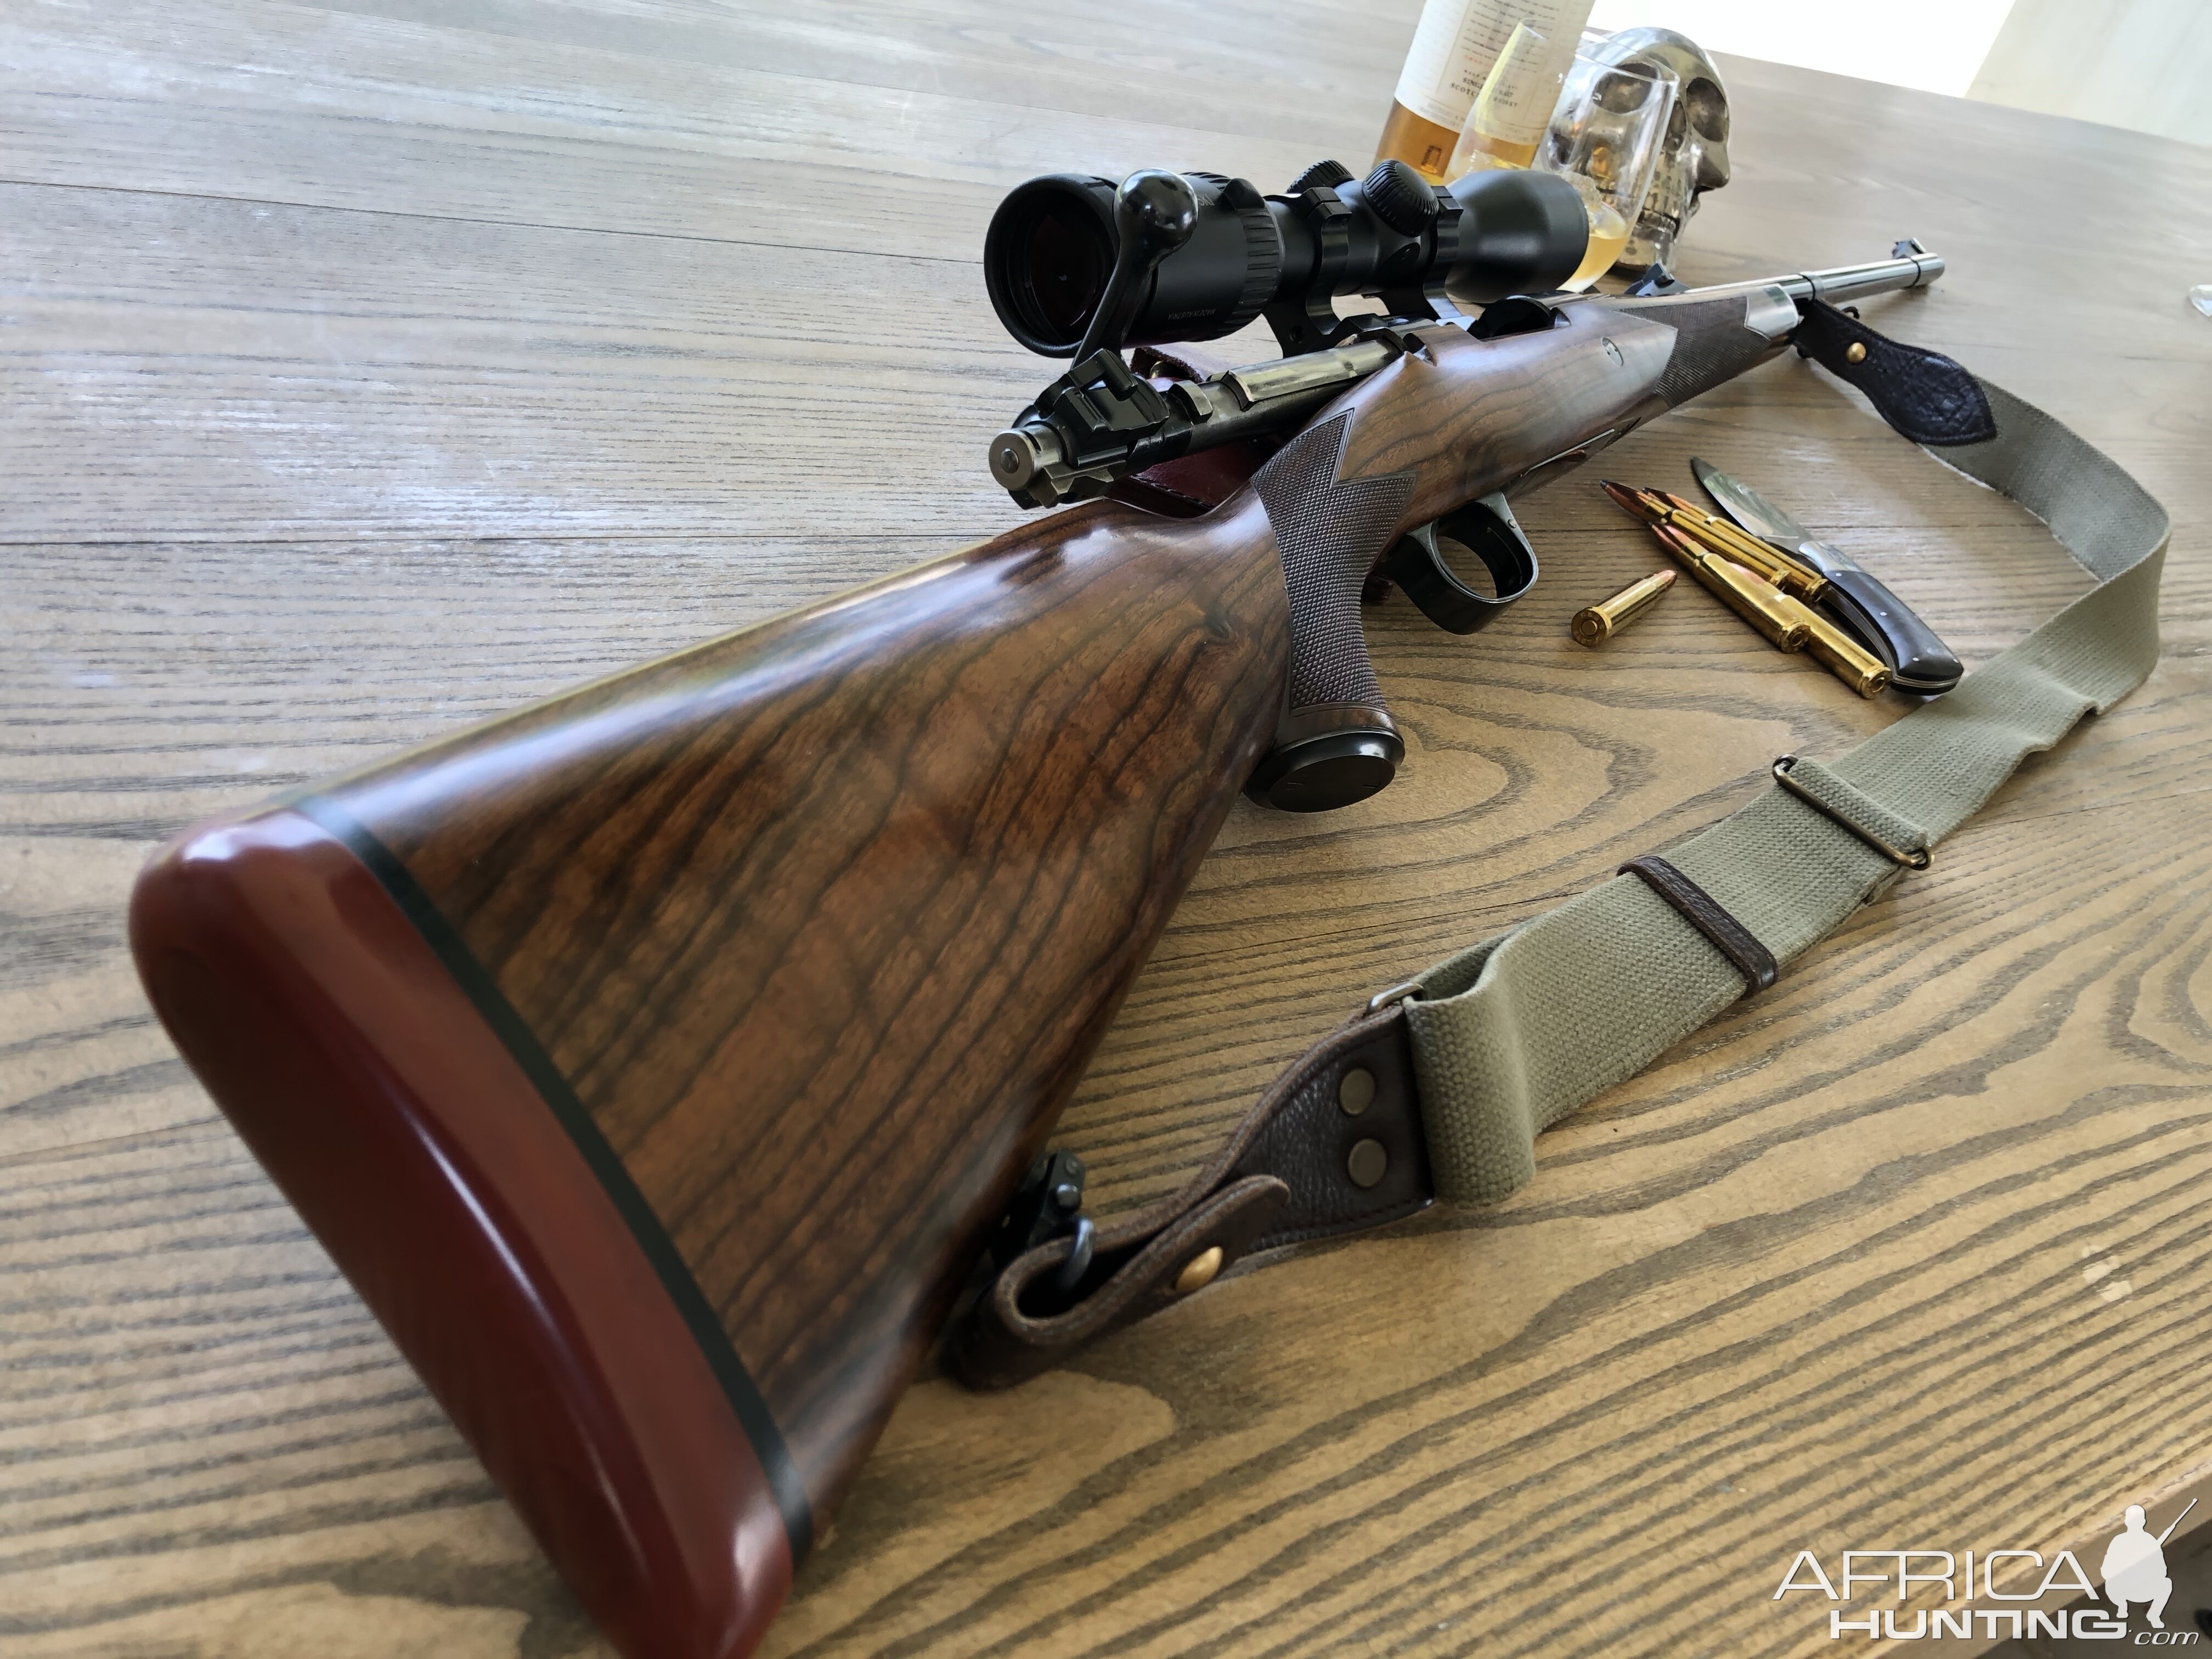 Custom 8x57 JS Rifle built on a commercial Mauser action